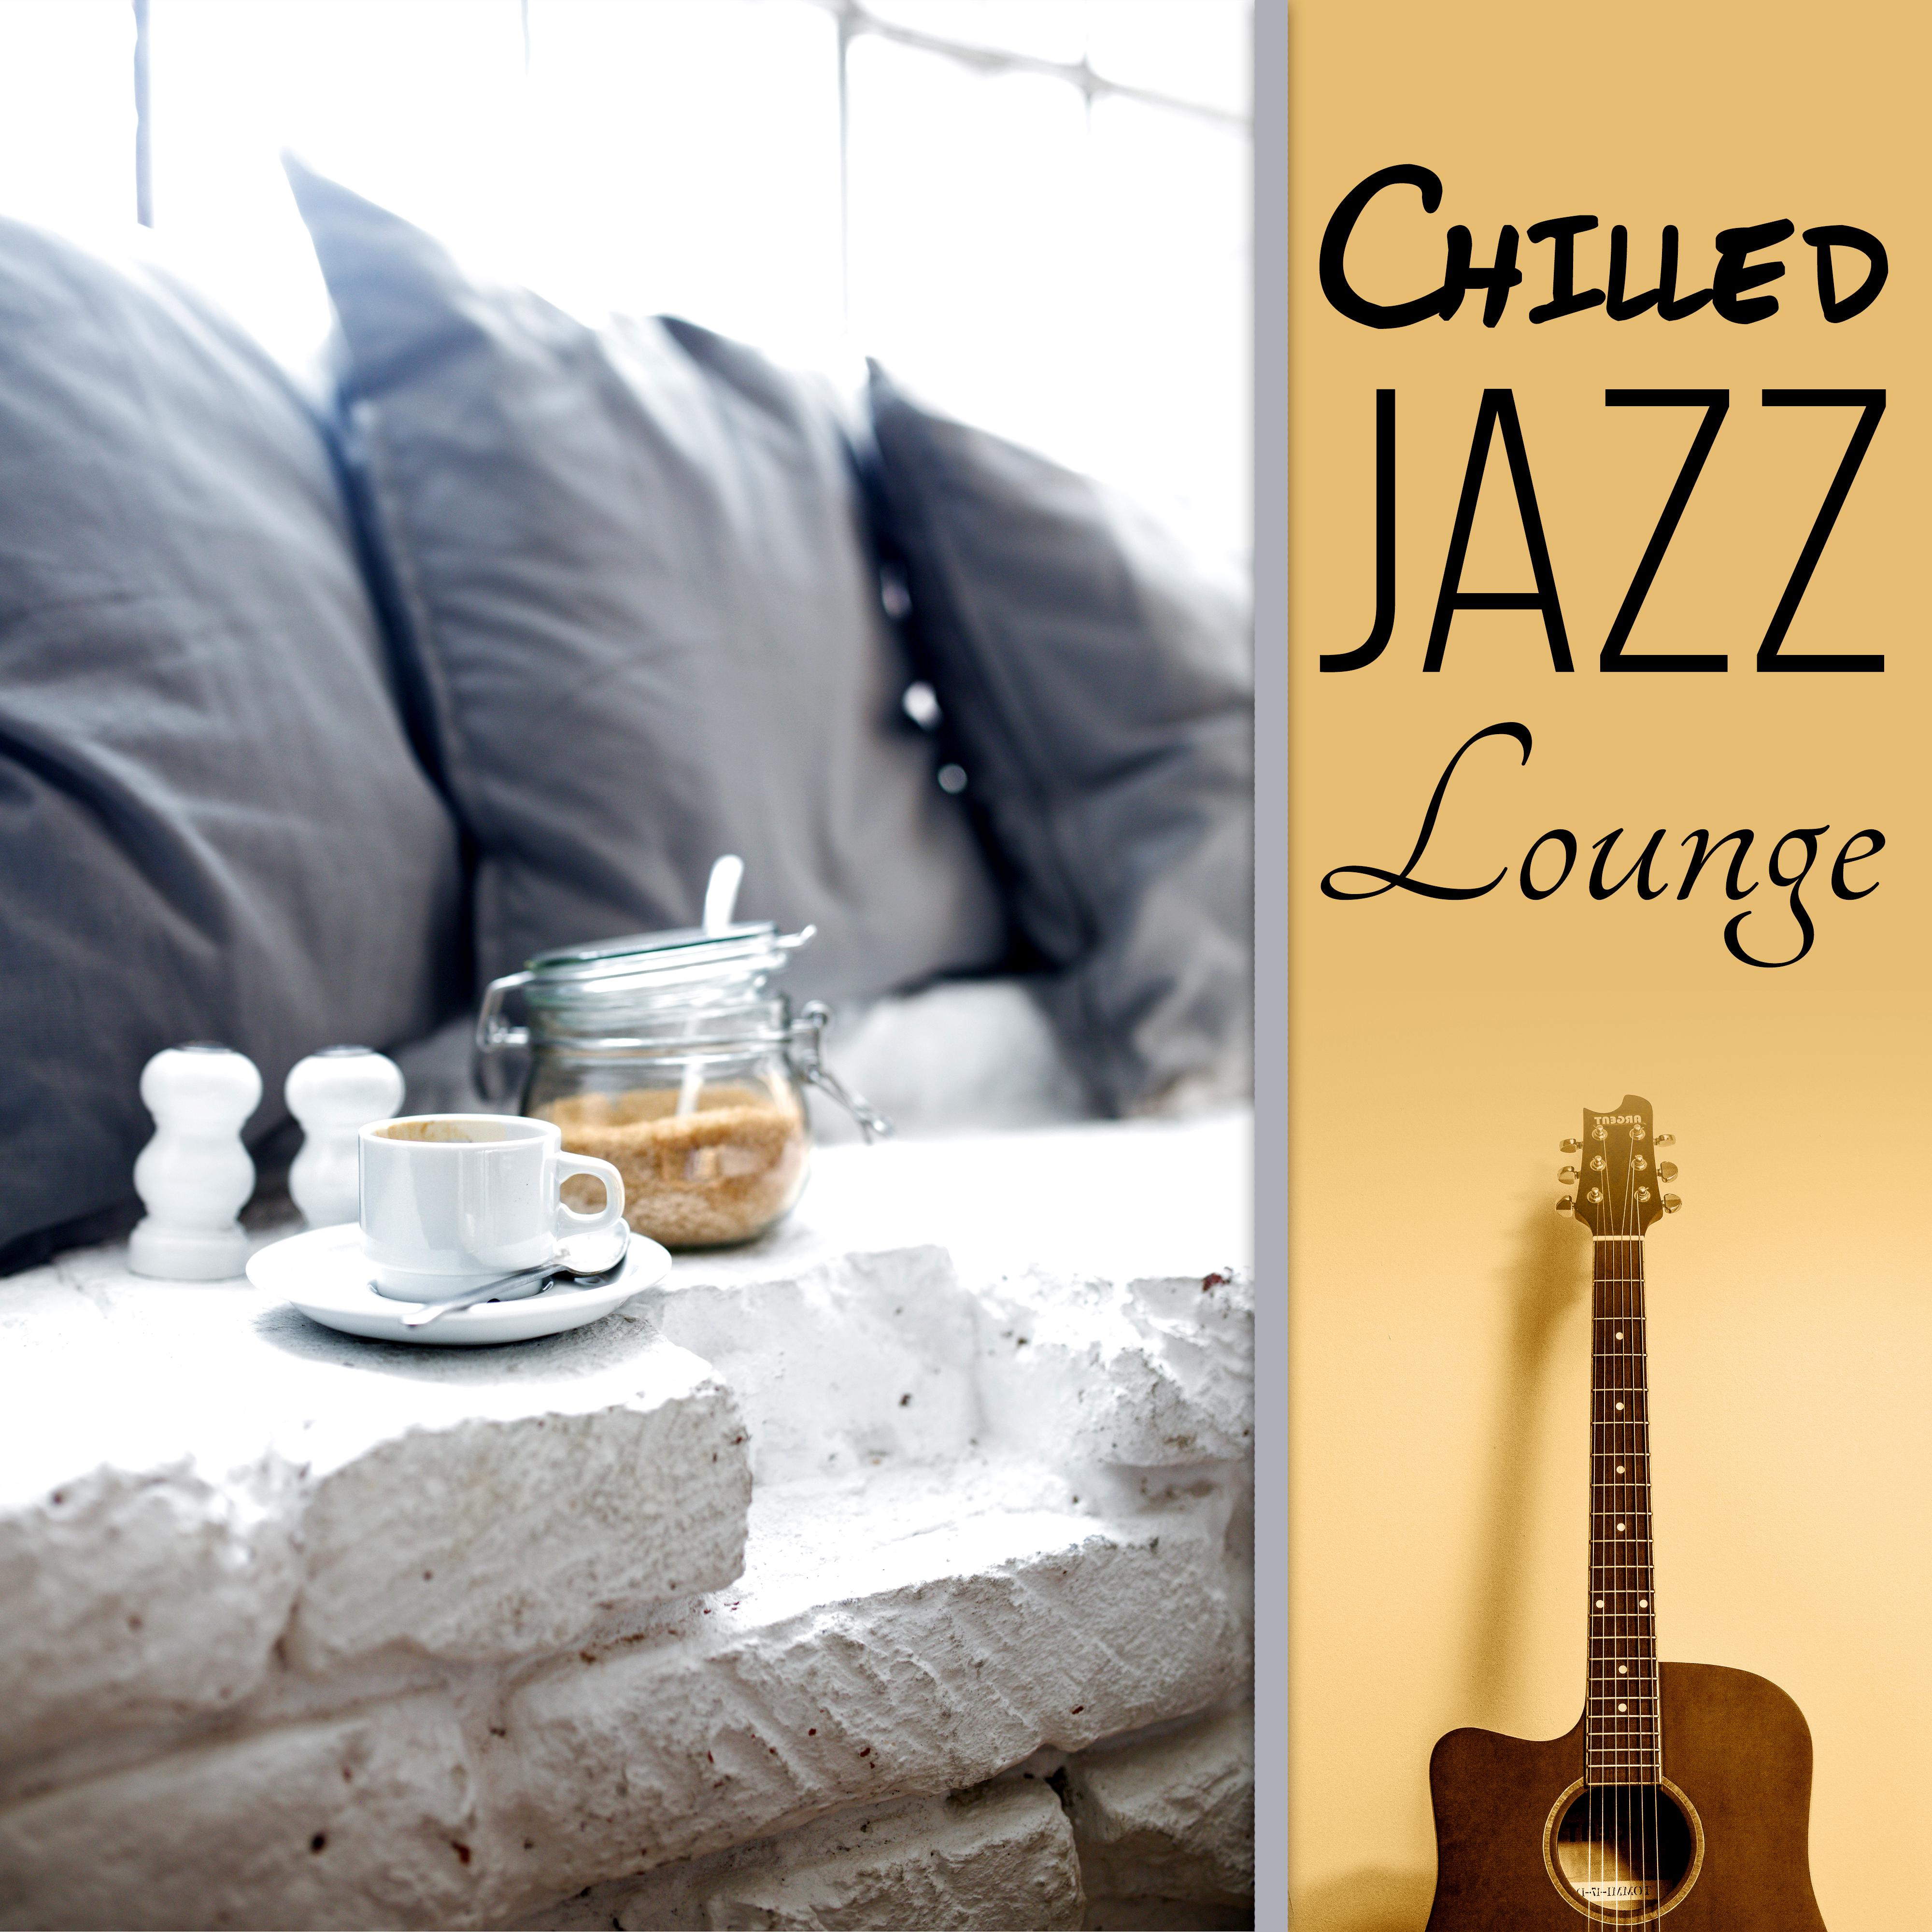 Chilled Jazz Lounge - Smooth Cafe Jazz, Piano Jazz, Guitar Songs & Soft Summer Jazz